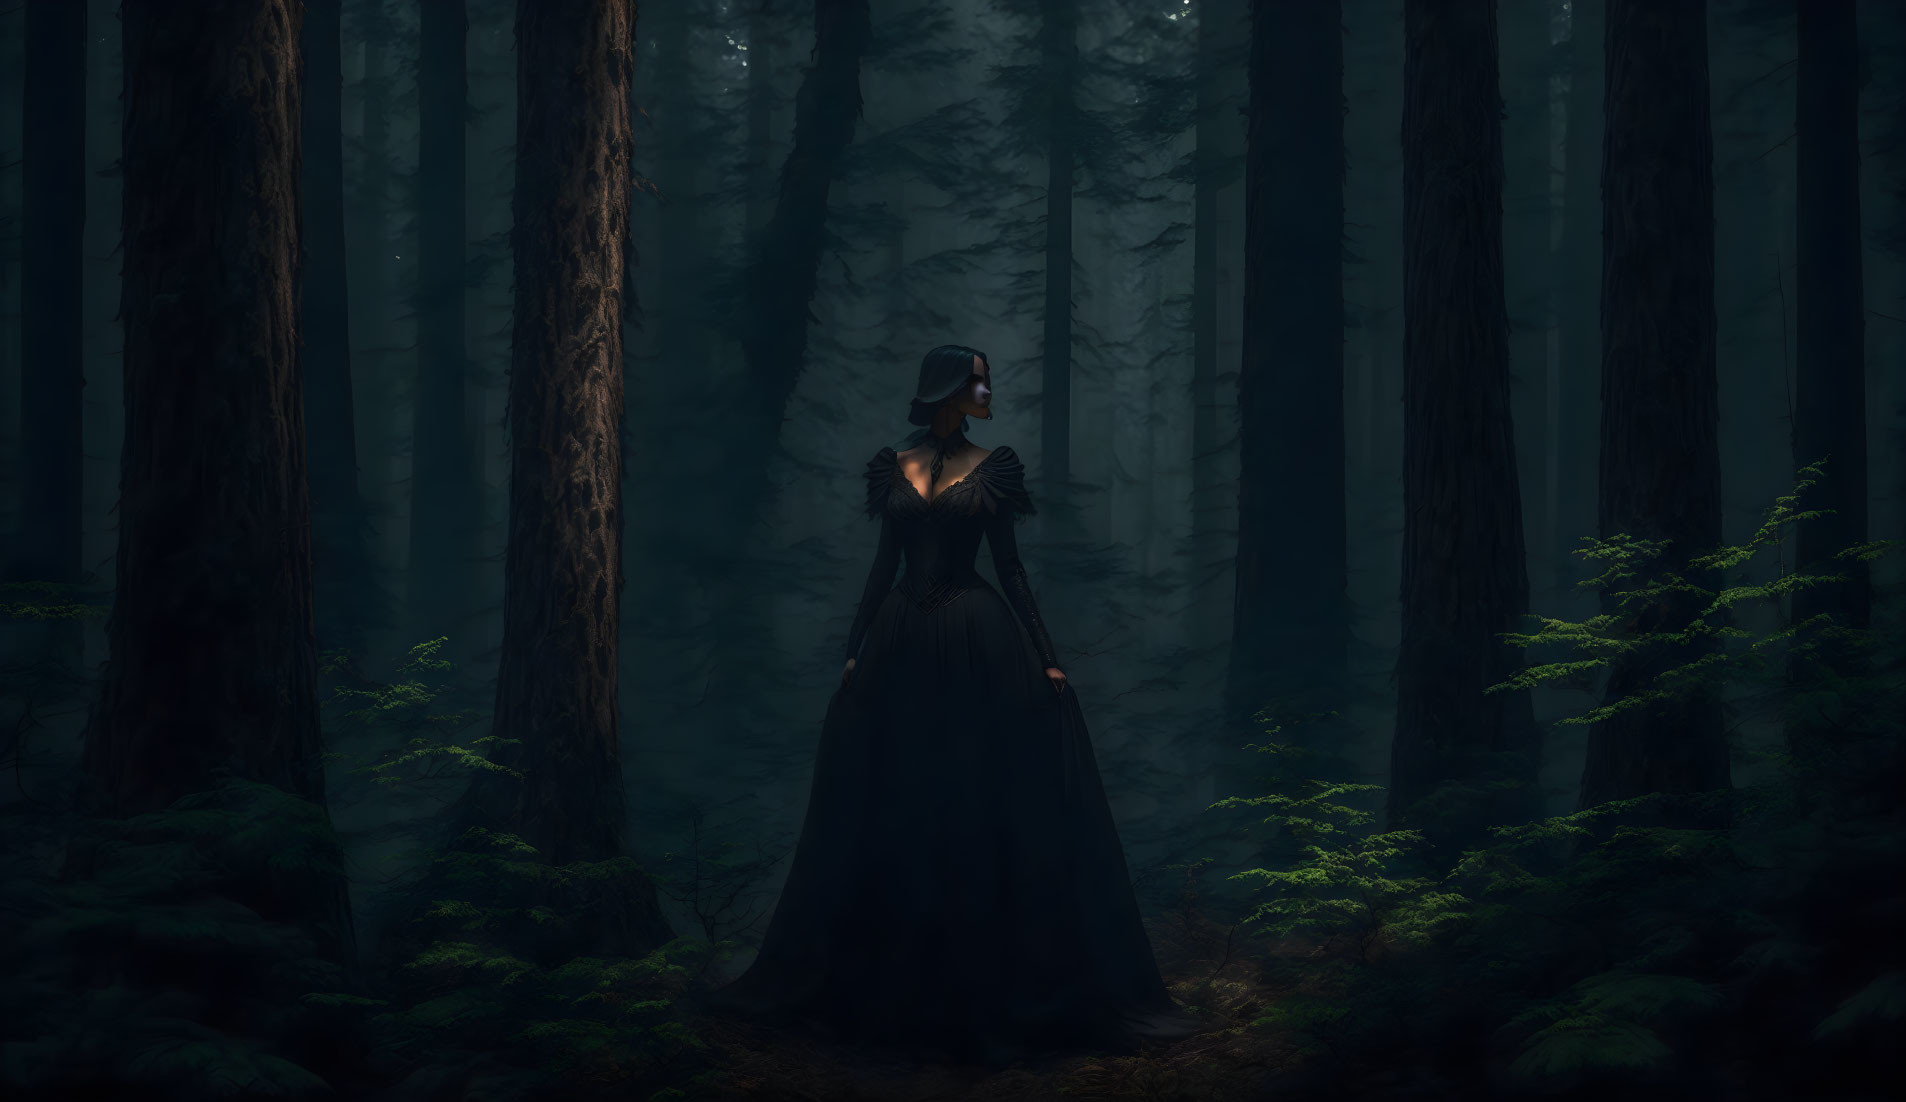 Woman in Dark Dress Standing in Misty Forest with Soft Light